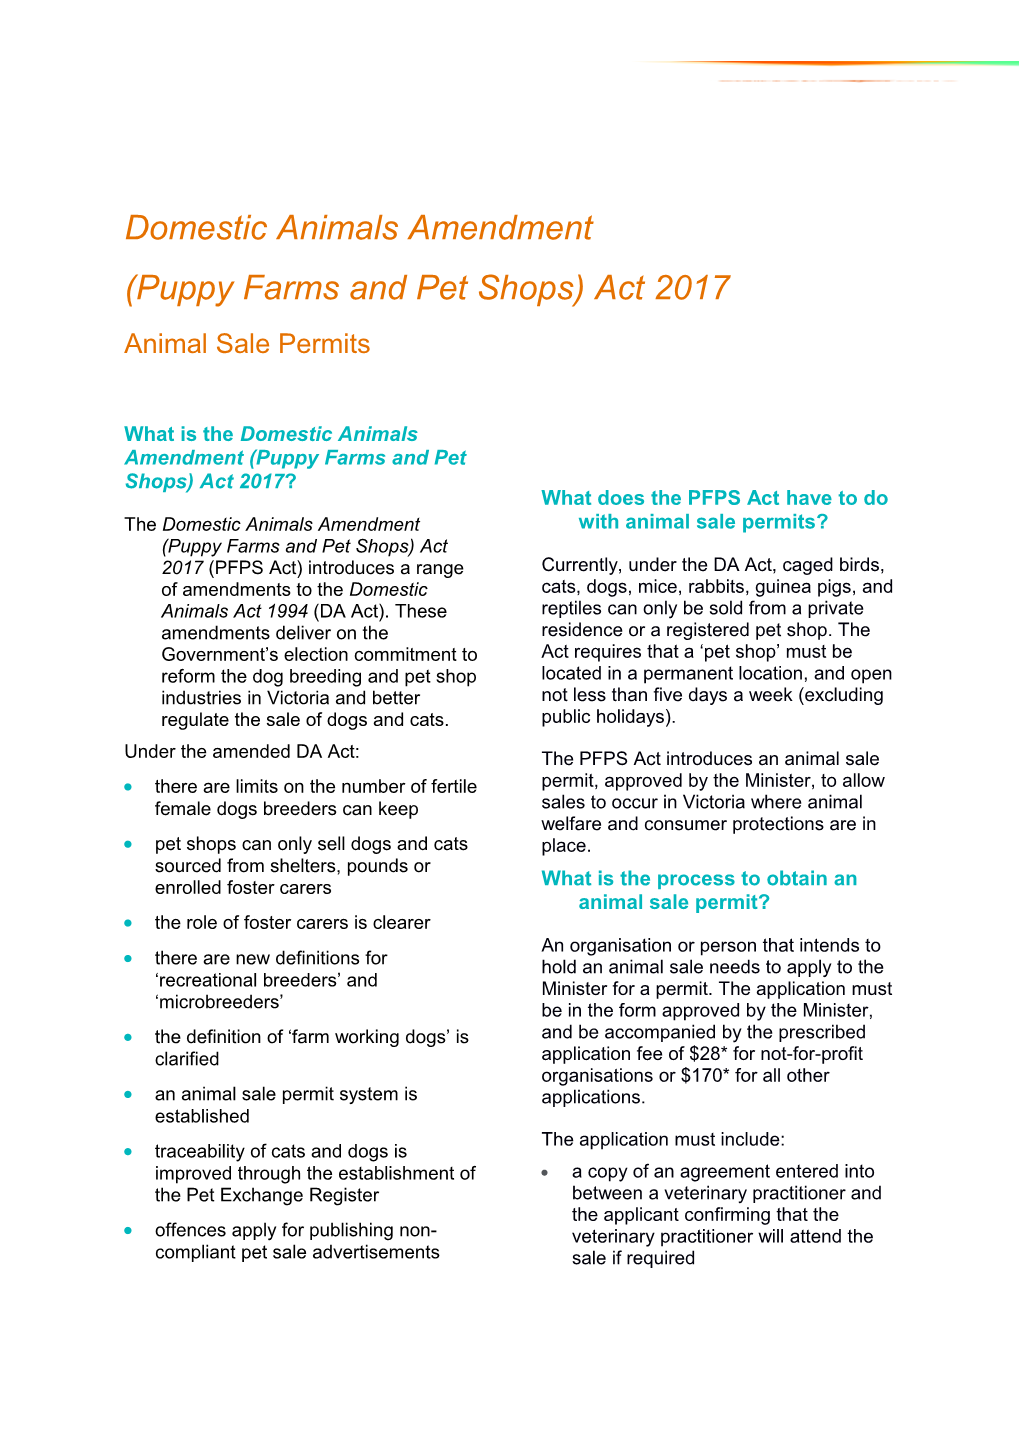 What Is the Domestic Animals Amendment (Puppy Farms and Pet Shops) Act 2017?